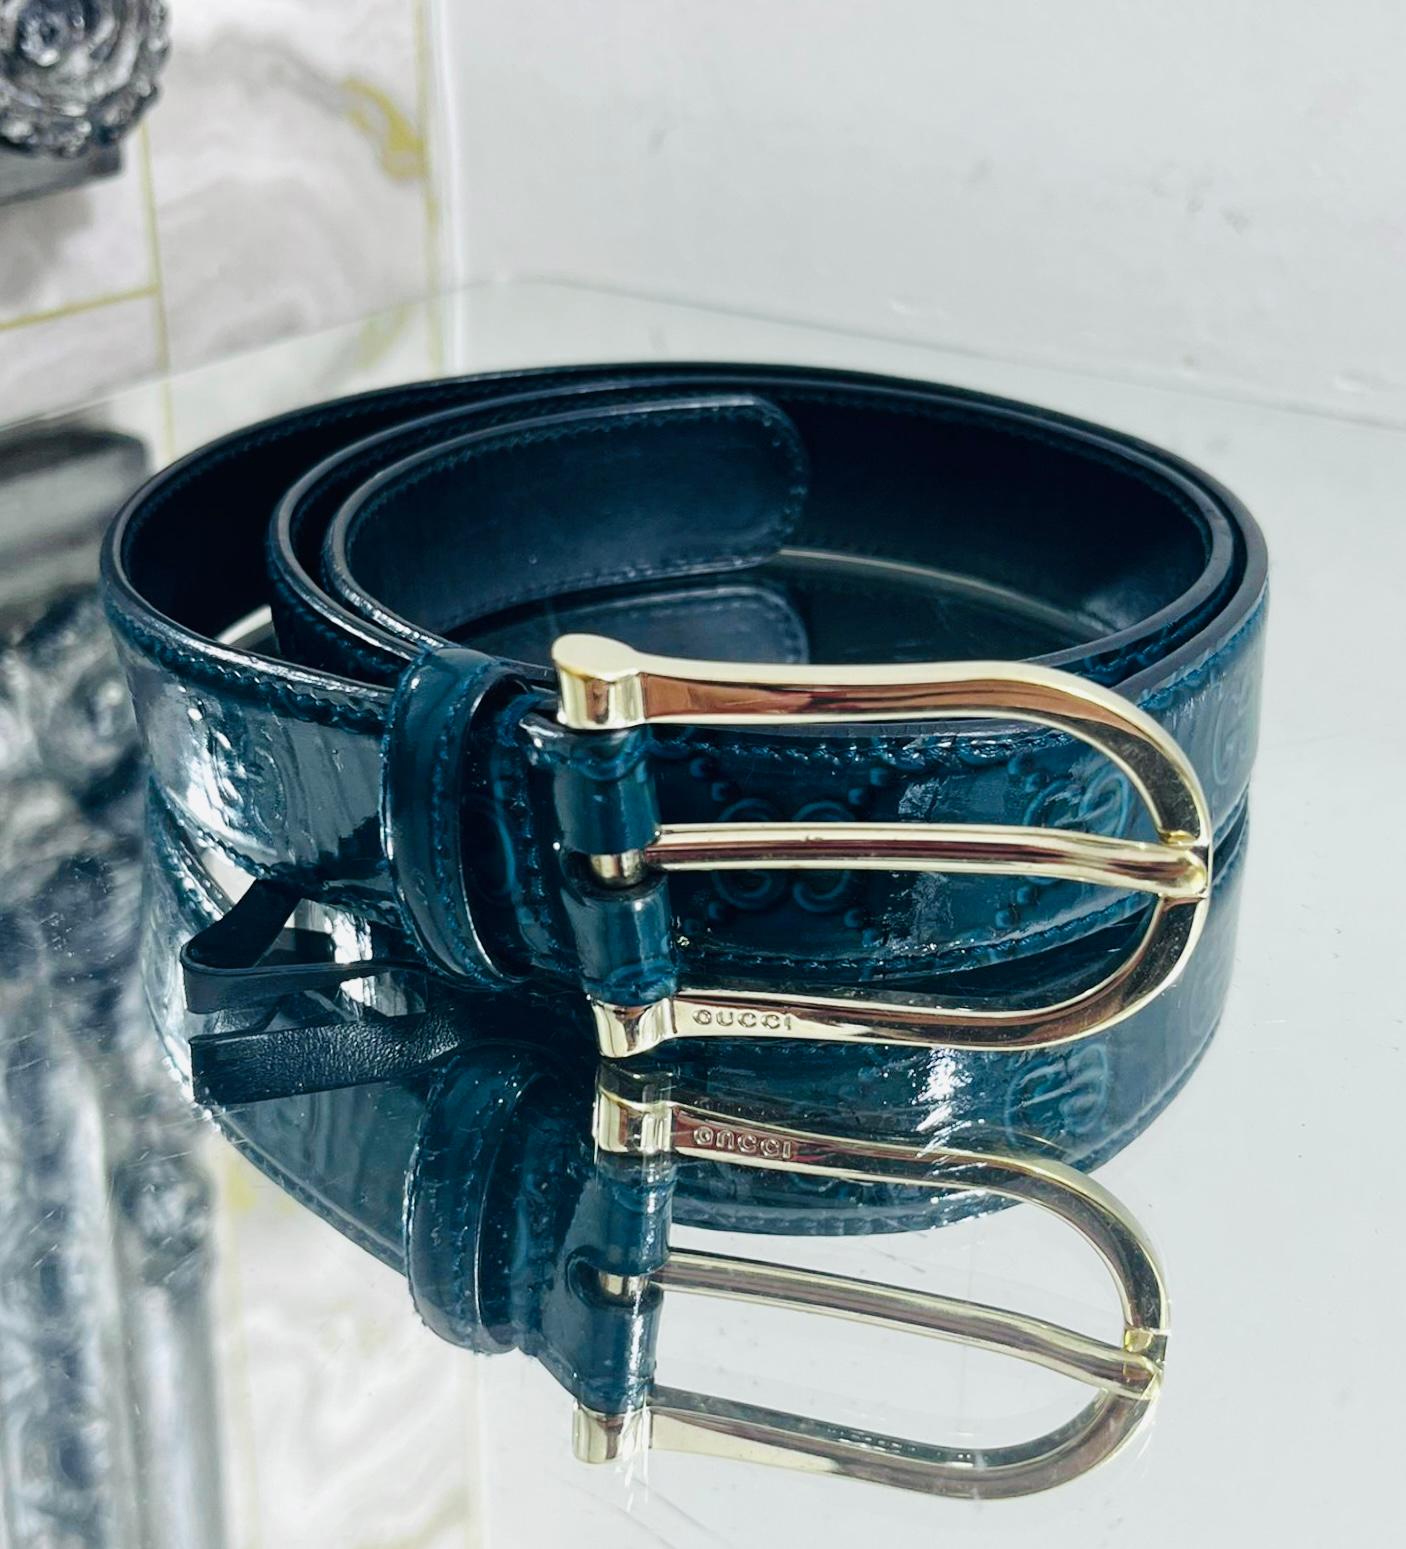 Gucci 'GG' Guccissima Patent Leather Belt

Dark teal belt designed with iconic Guccissima pattern.

Detailed with gold 'Gucci' engraved buckle.

Size – 100cm

Condition – Very Good

Composition – Patent Leather

Comes with – Belt Only